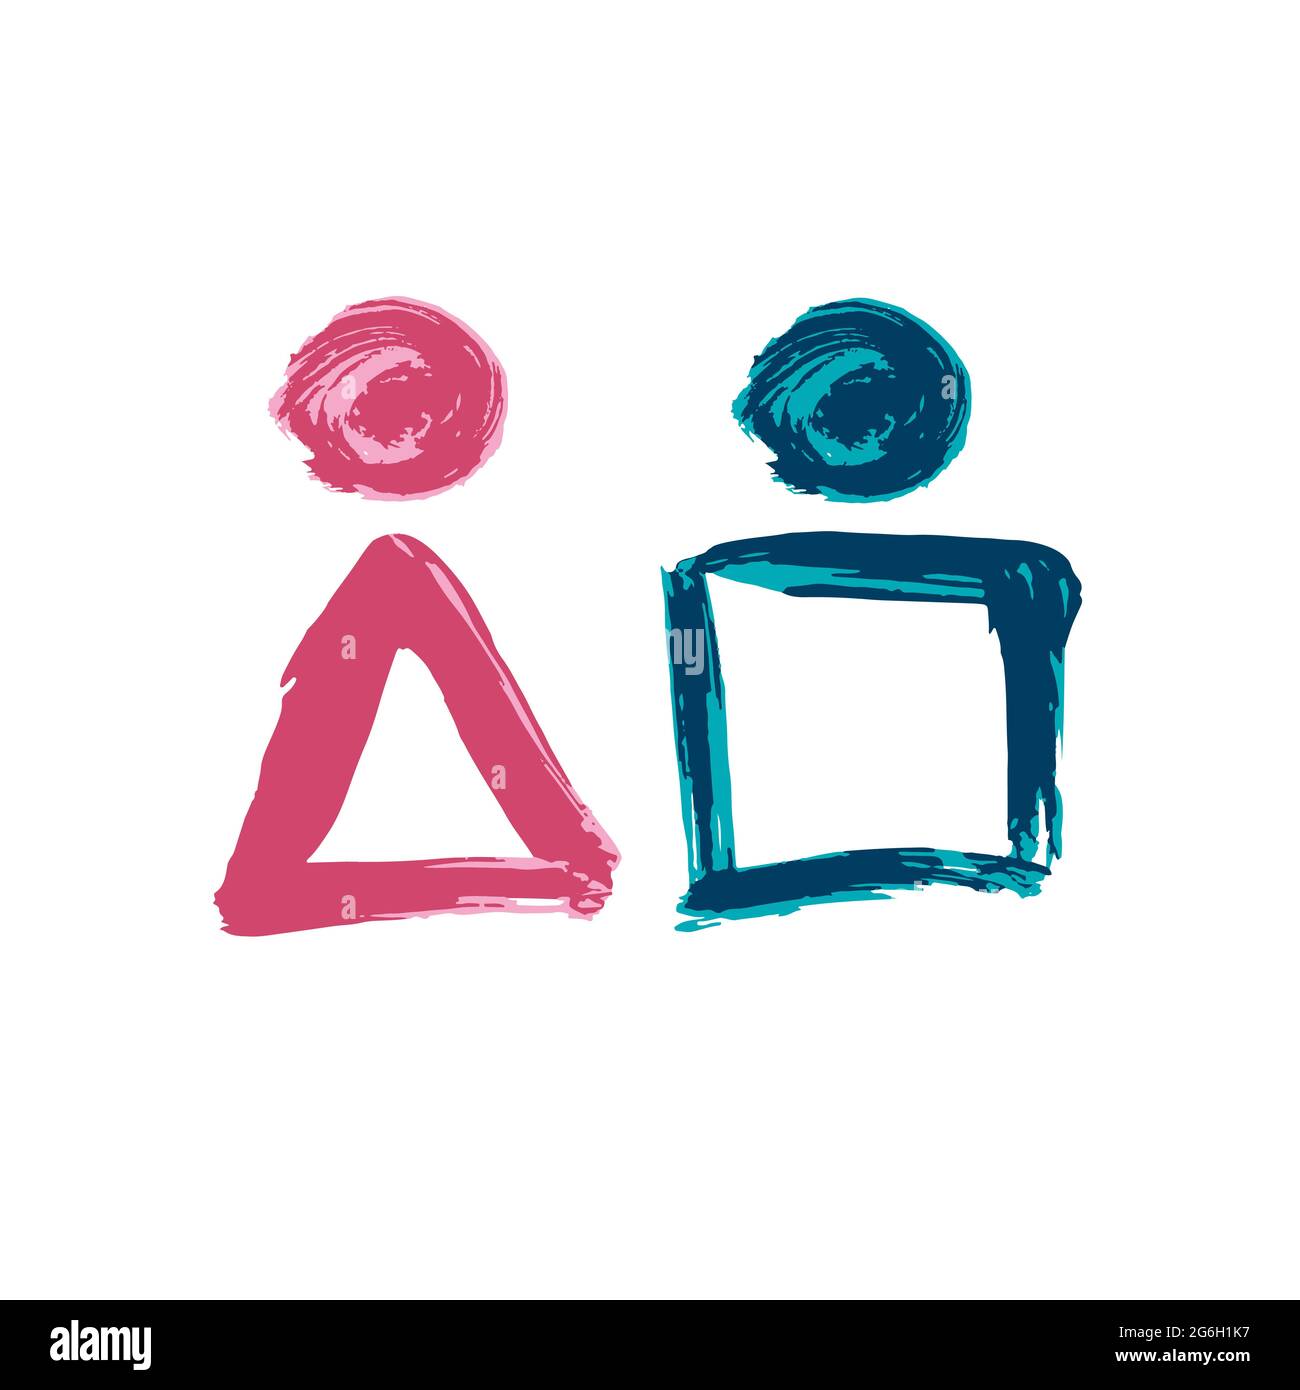 Creative illustration, acrylic paints. Male and female public washroom door lavatory. Ladies and gents restroom or woman and man bathroom. Abstract sa Stock Vector